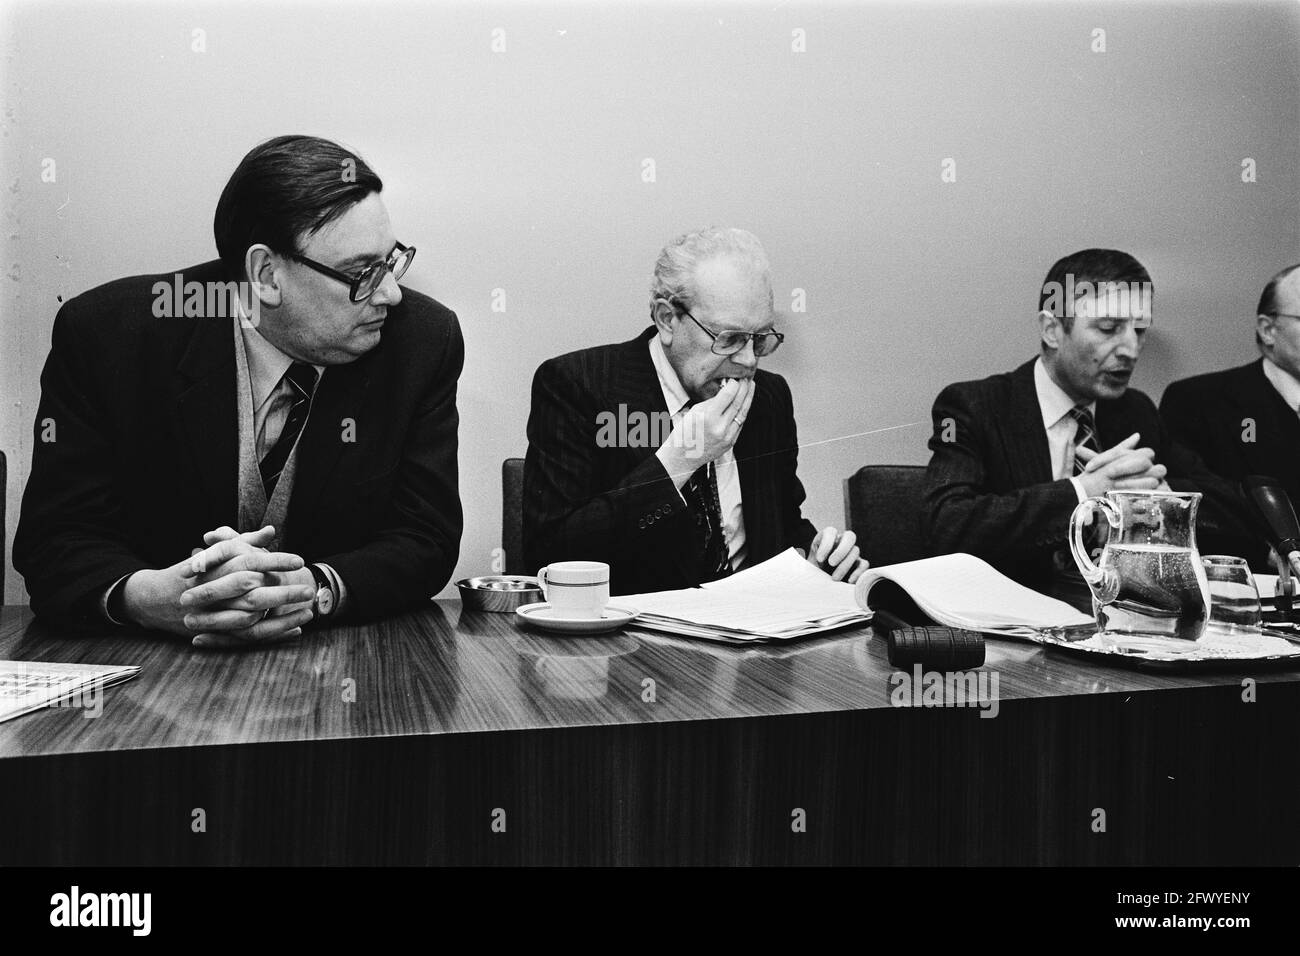 Government, trade unions and employers discuss in SER building The Hague about labor contract policy for 1980; van Aardenne, Albeda, February 27, 1980, VAKBONDEN, WERKGEVERS, press conferences, The Netherlands, 20th century press agency photo, news to remember, documentary, historic photography 1945-1990, visual stories, human history of the Twentieth Century, capturing moments in time Stock Photo